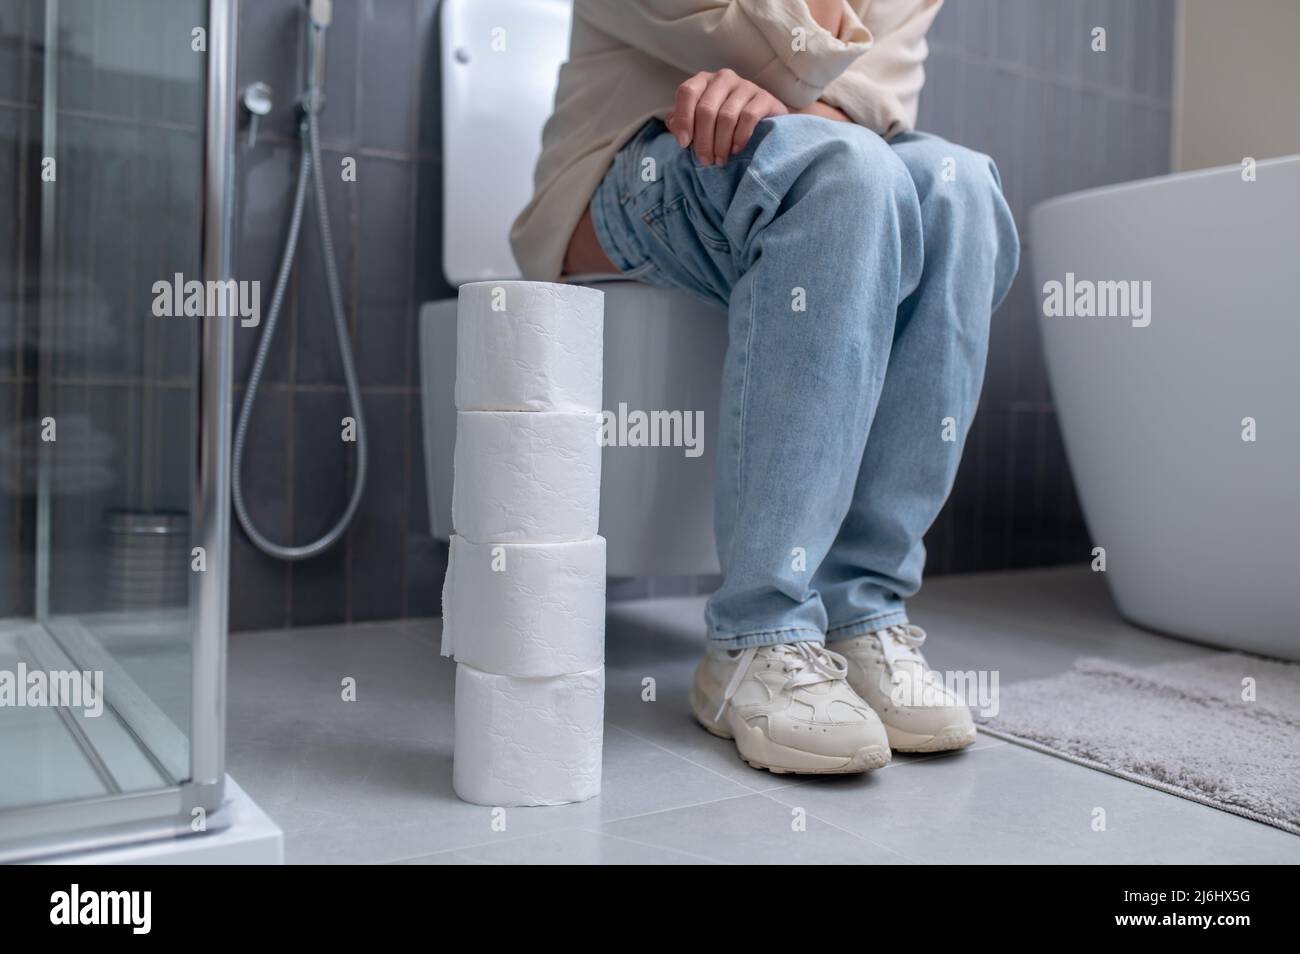 A young woman sitting on a toilet bowl Stock Photo